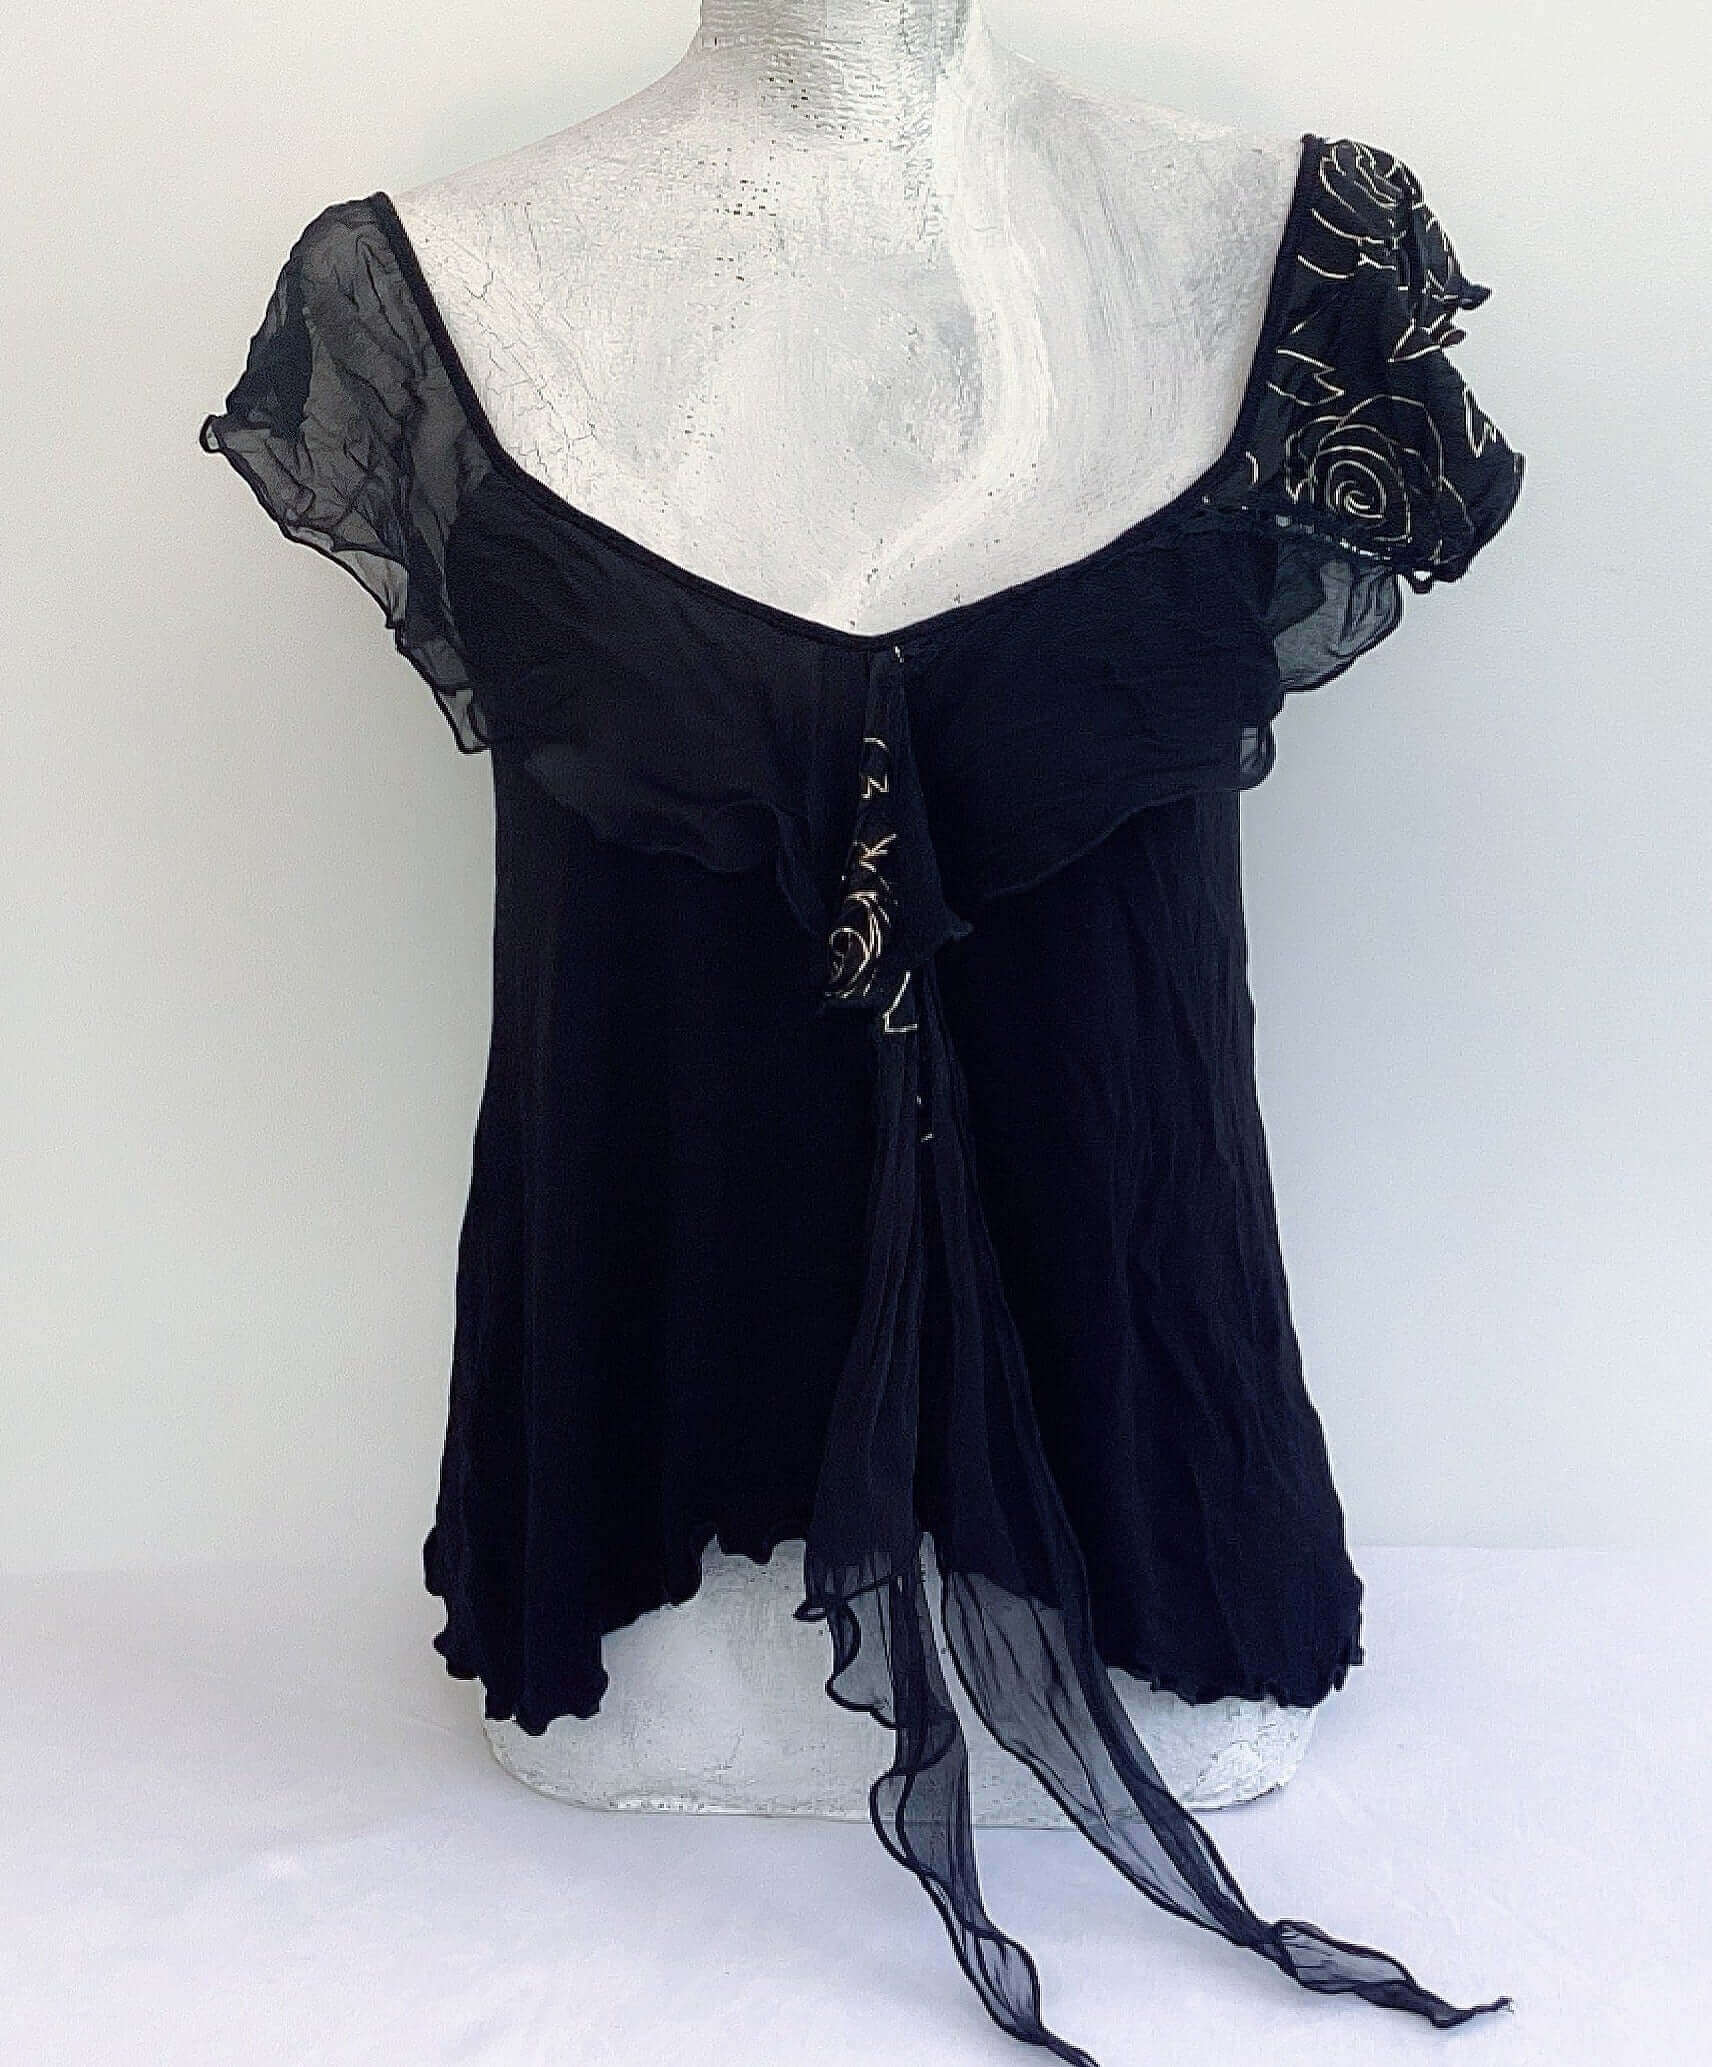 Front view of camisole, contrasting, patterned, wide chiffon frill straps, joining at center bust, flowing down in front.